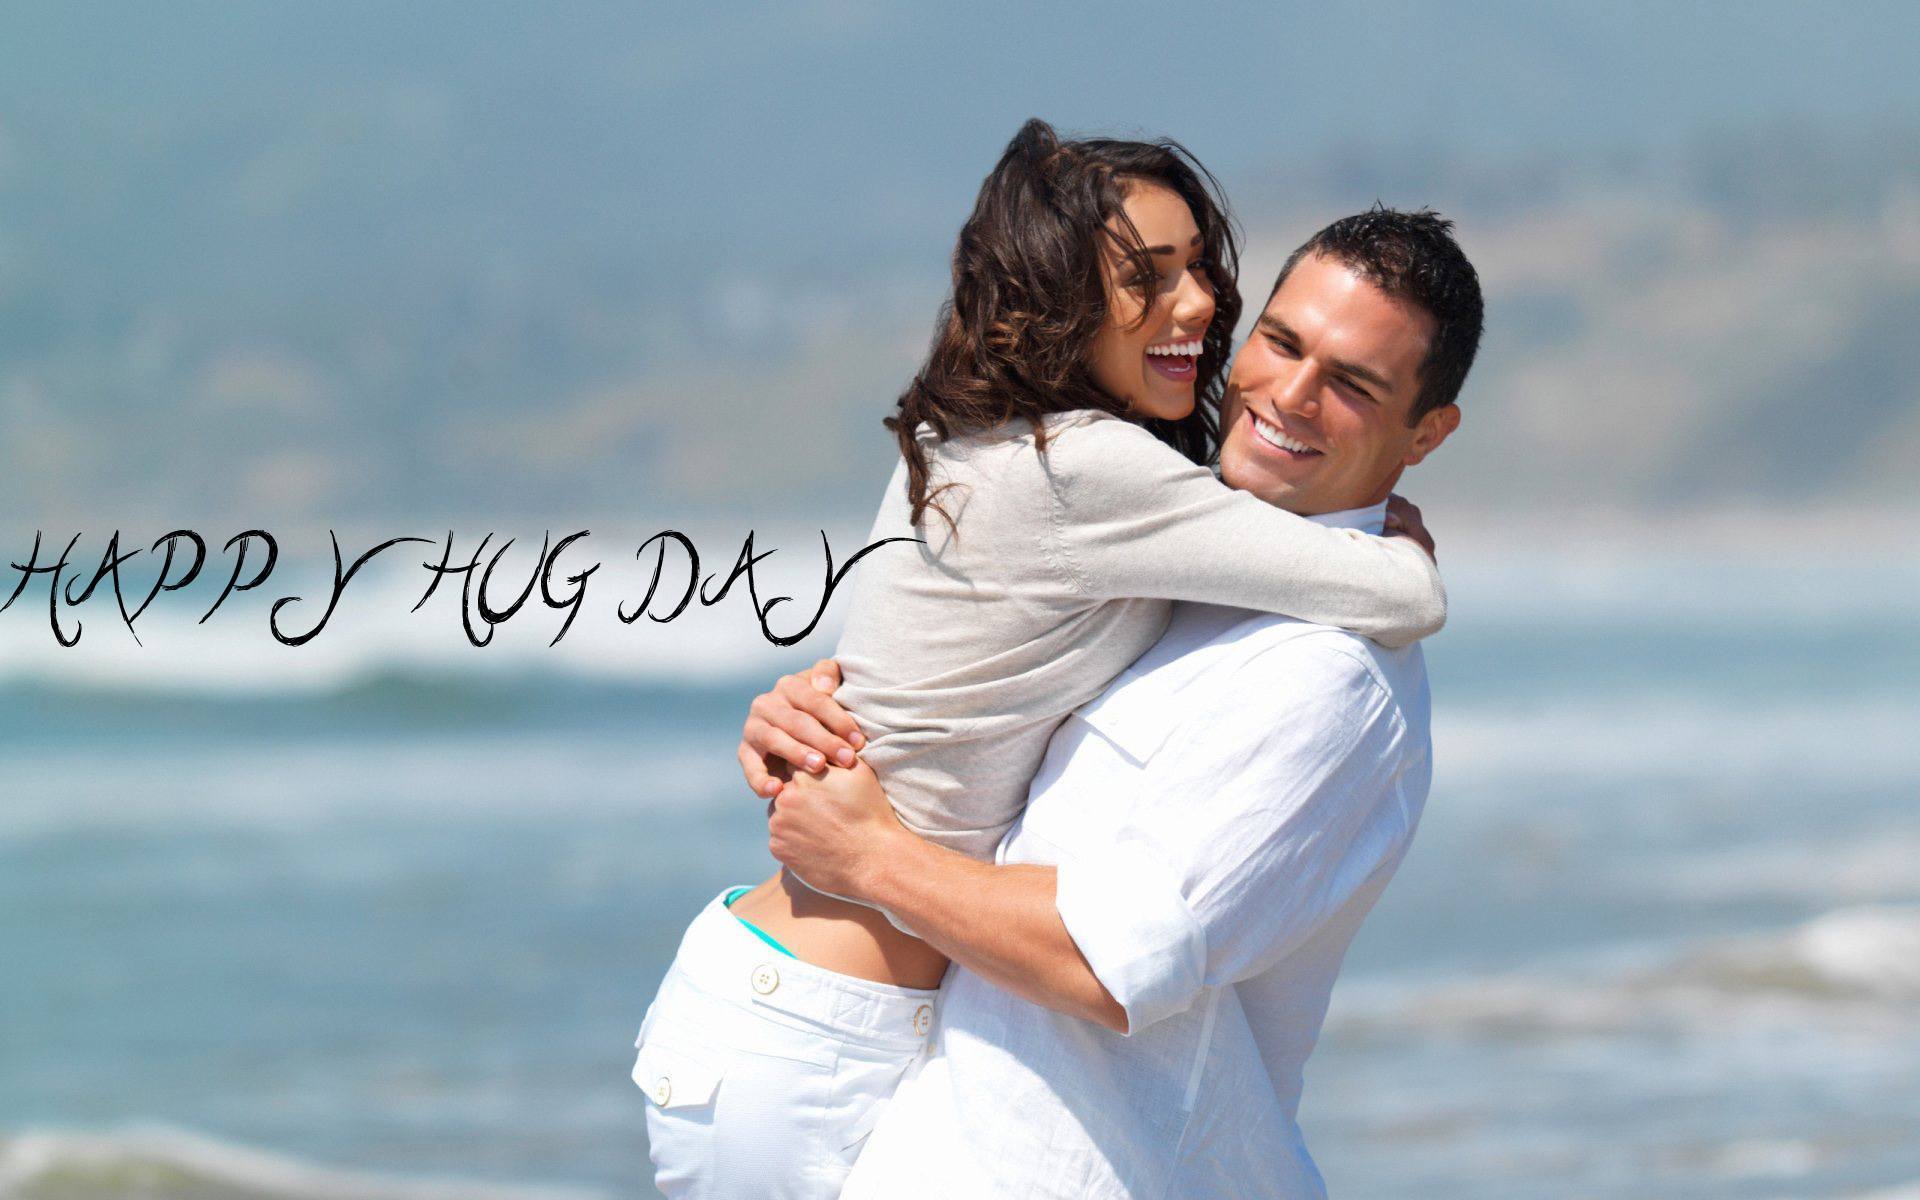 Romantic Happy Hug Day Messages For Boyfriend/Husband